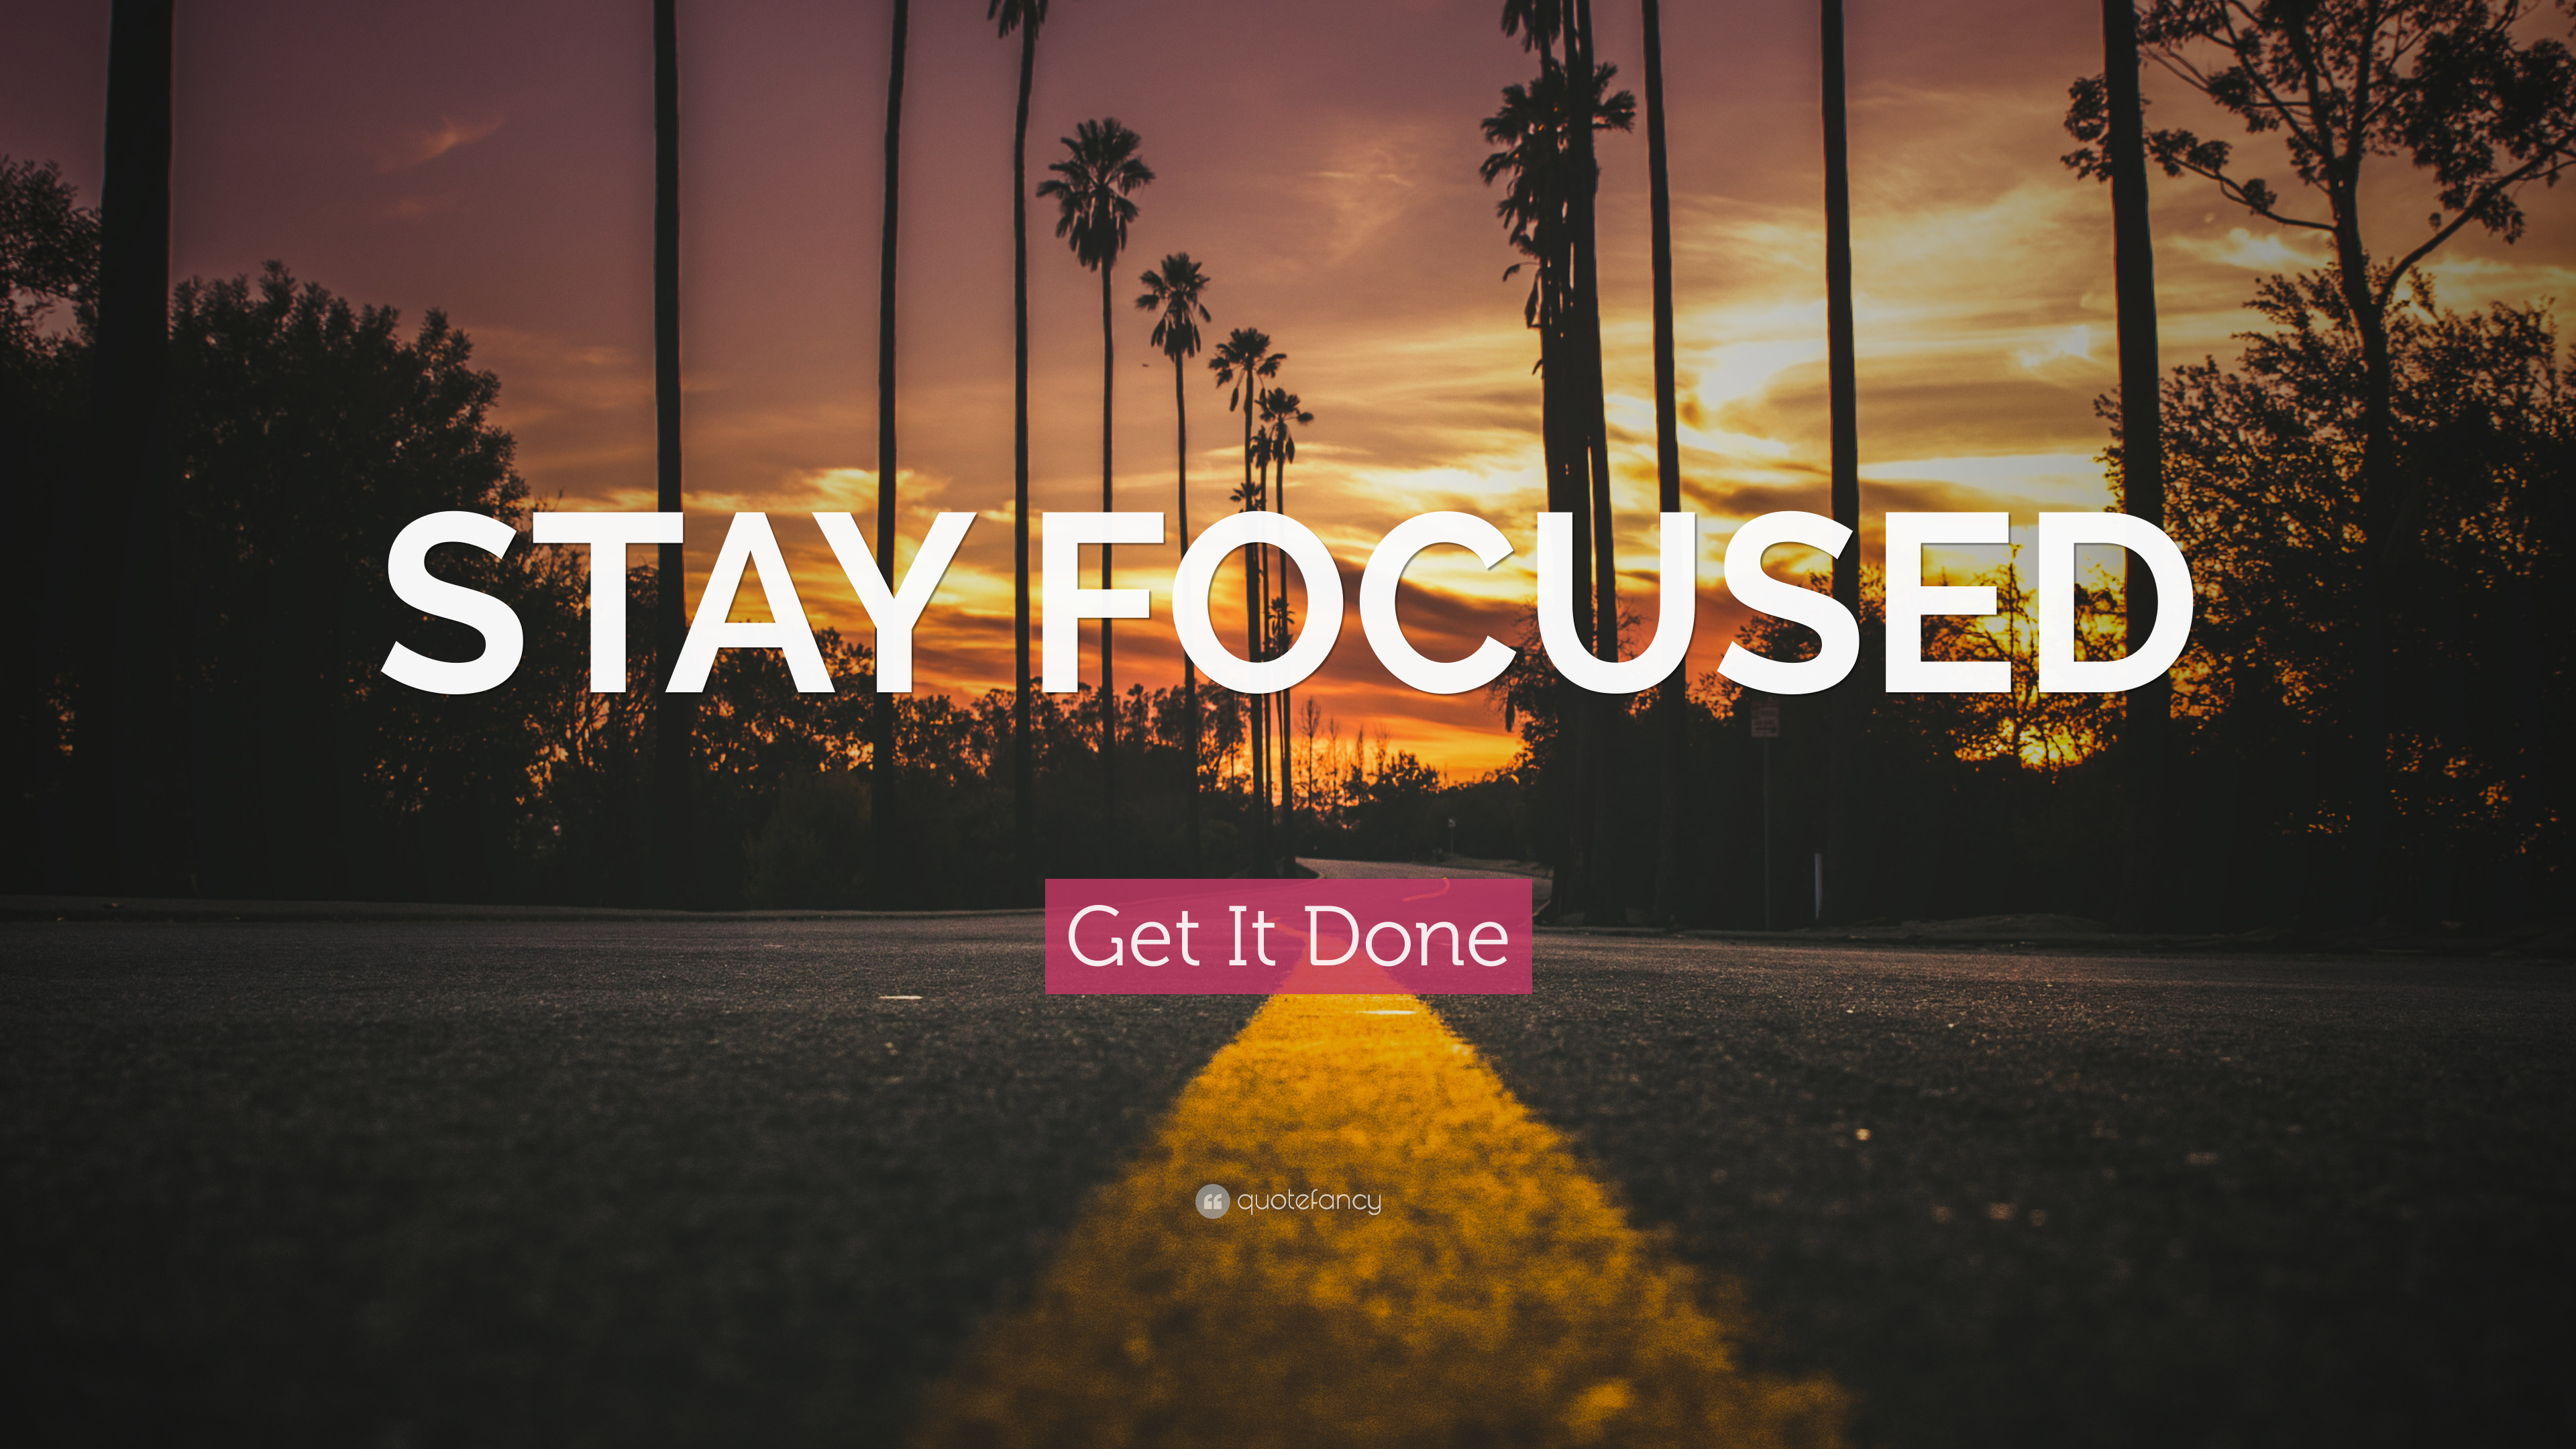 Get It Done Quote: “STAY FOCUSED”